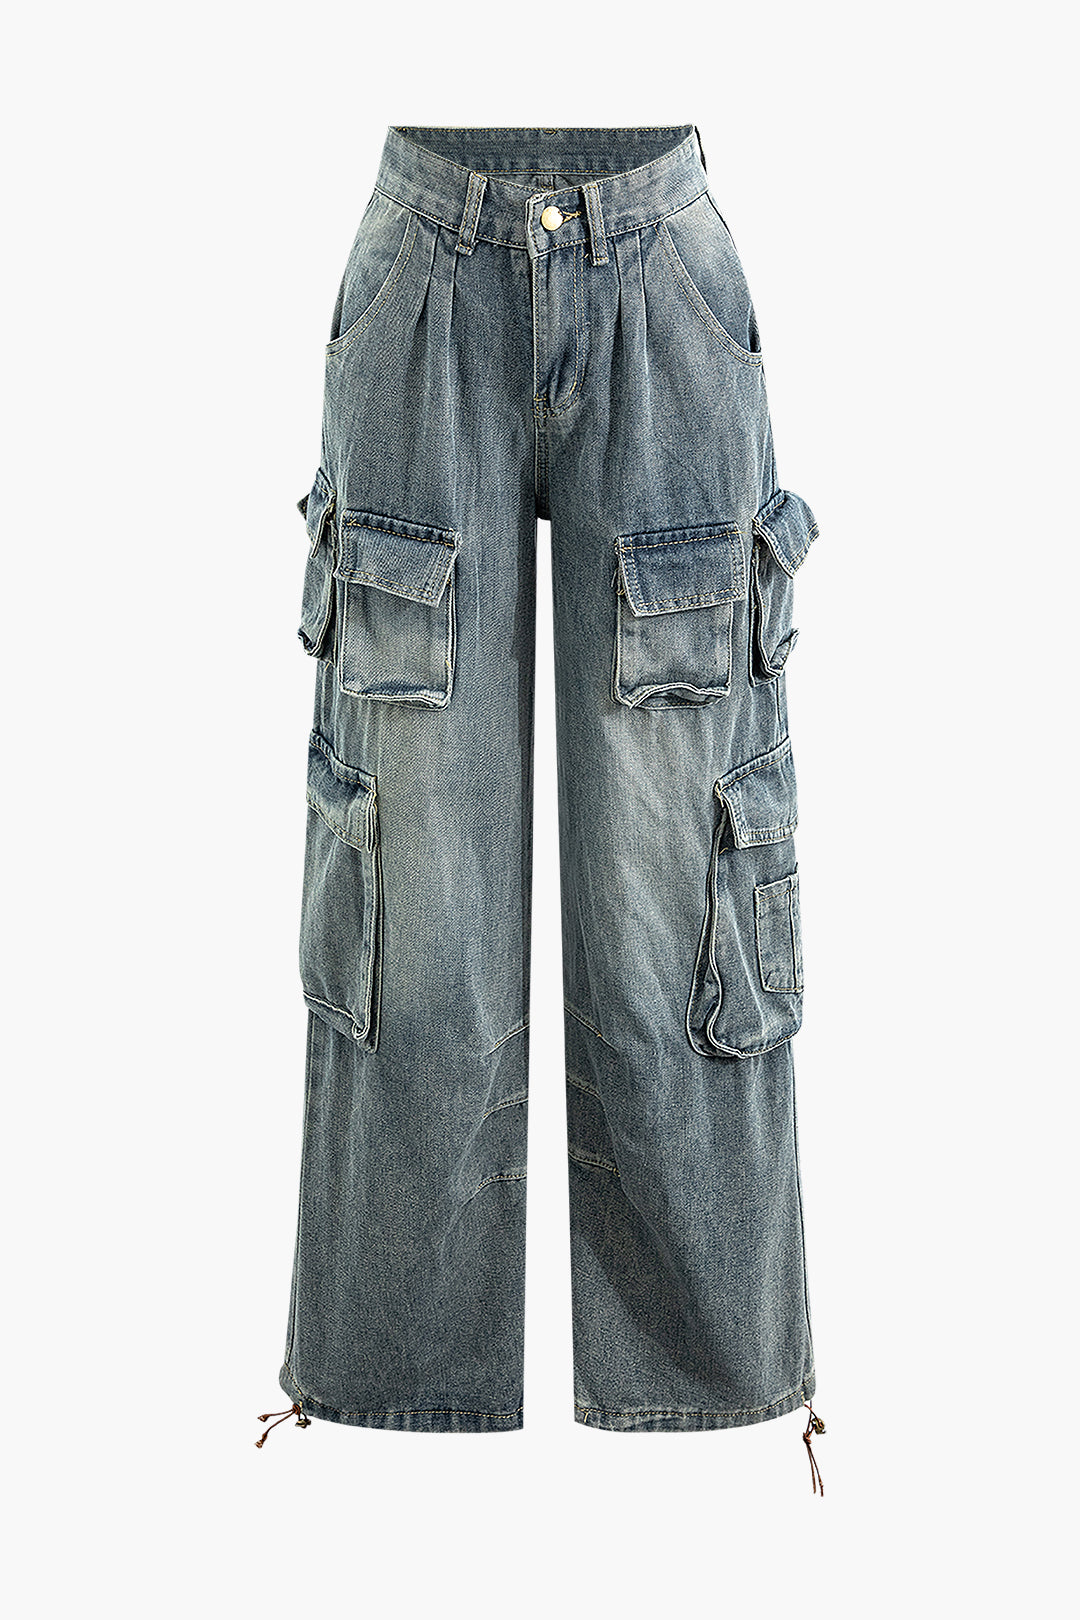 Distressed Faded Flap Pocket Wide Leg Cargo Jeans